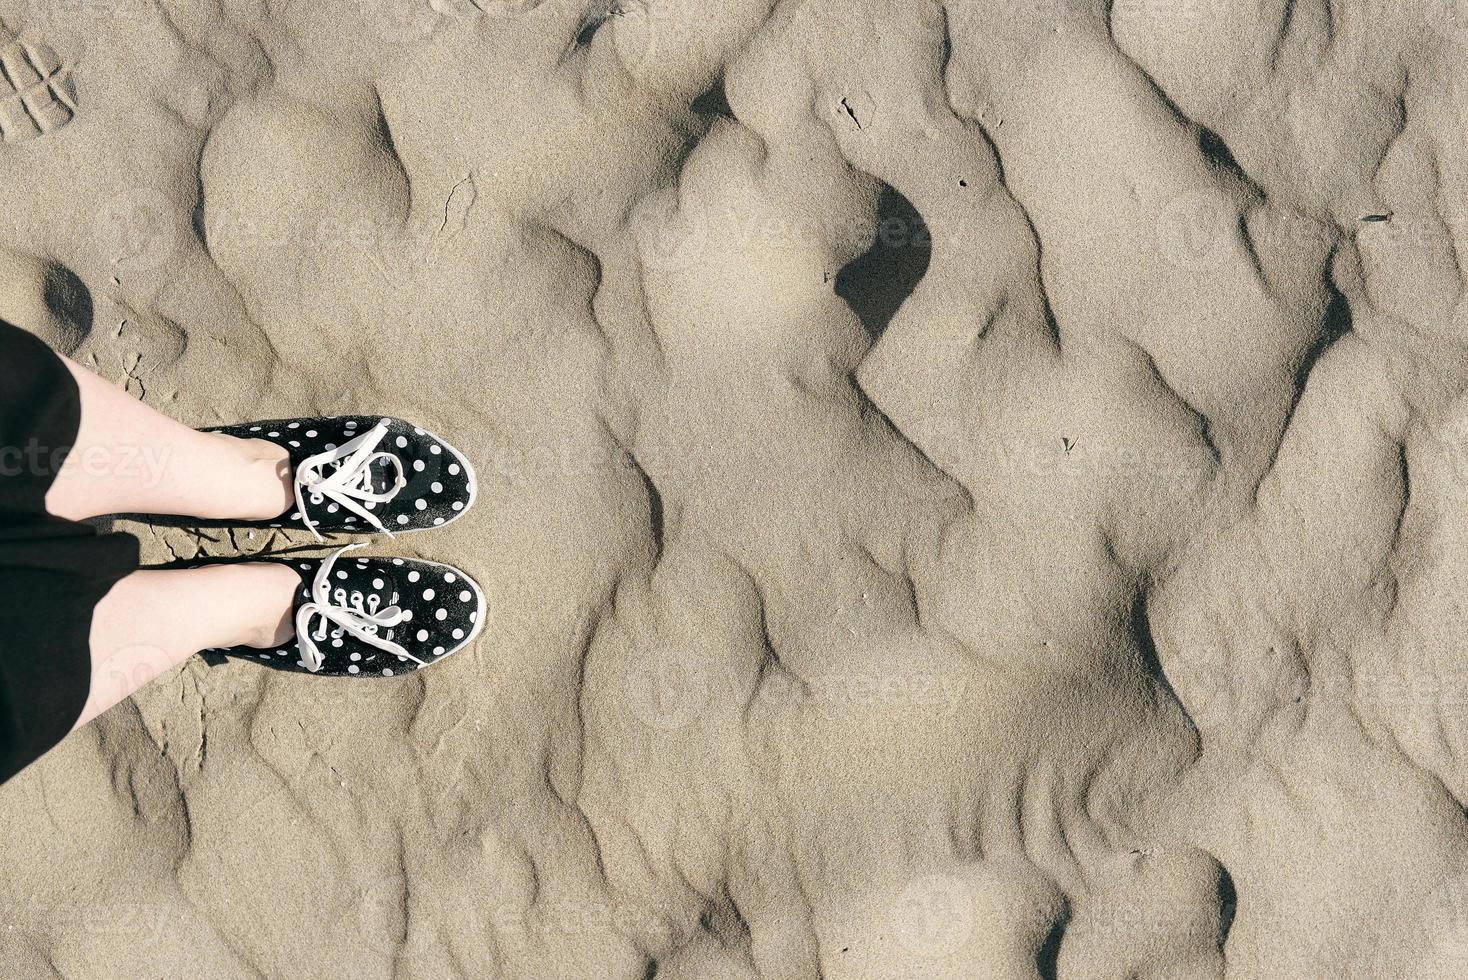 feet in polka dots shoes on the sand in desert photo